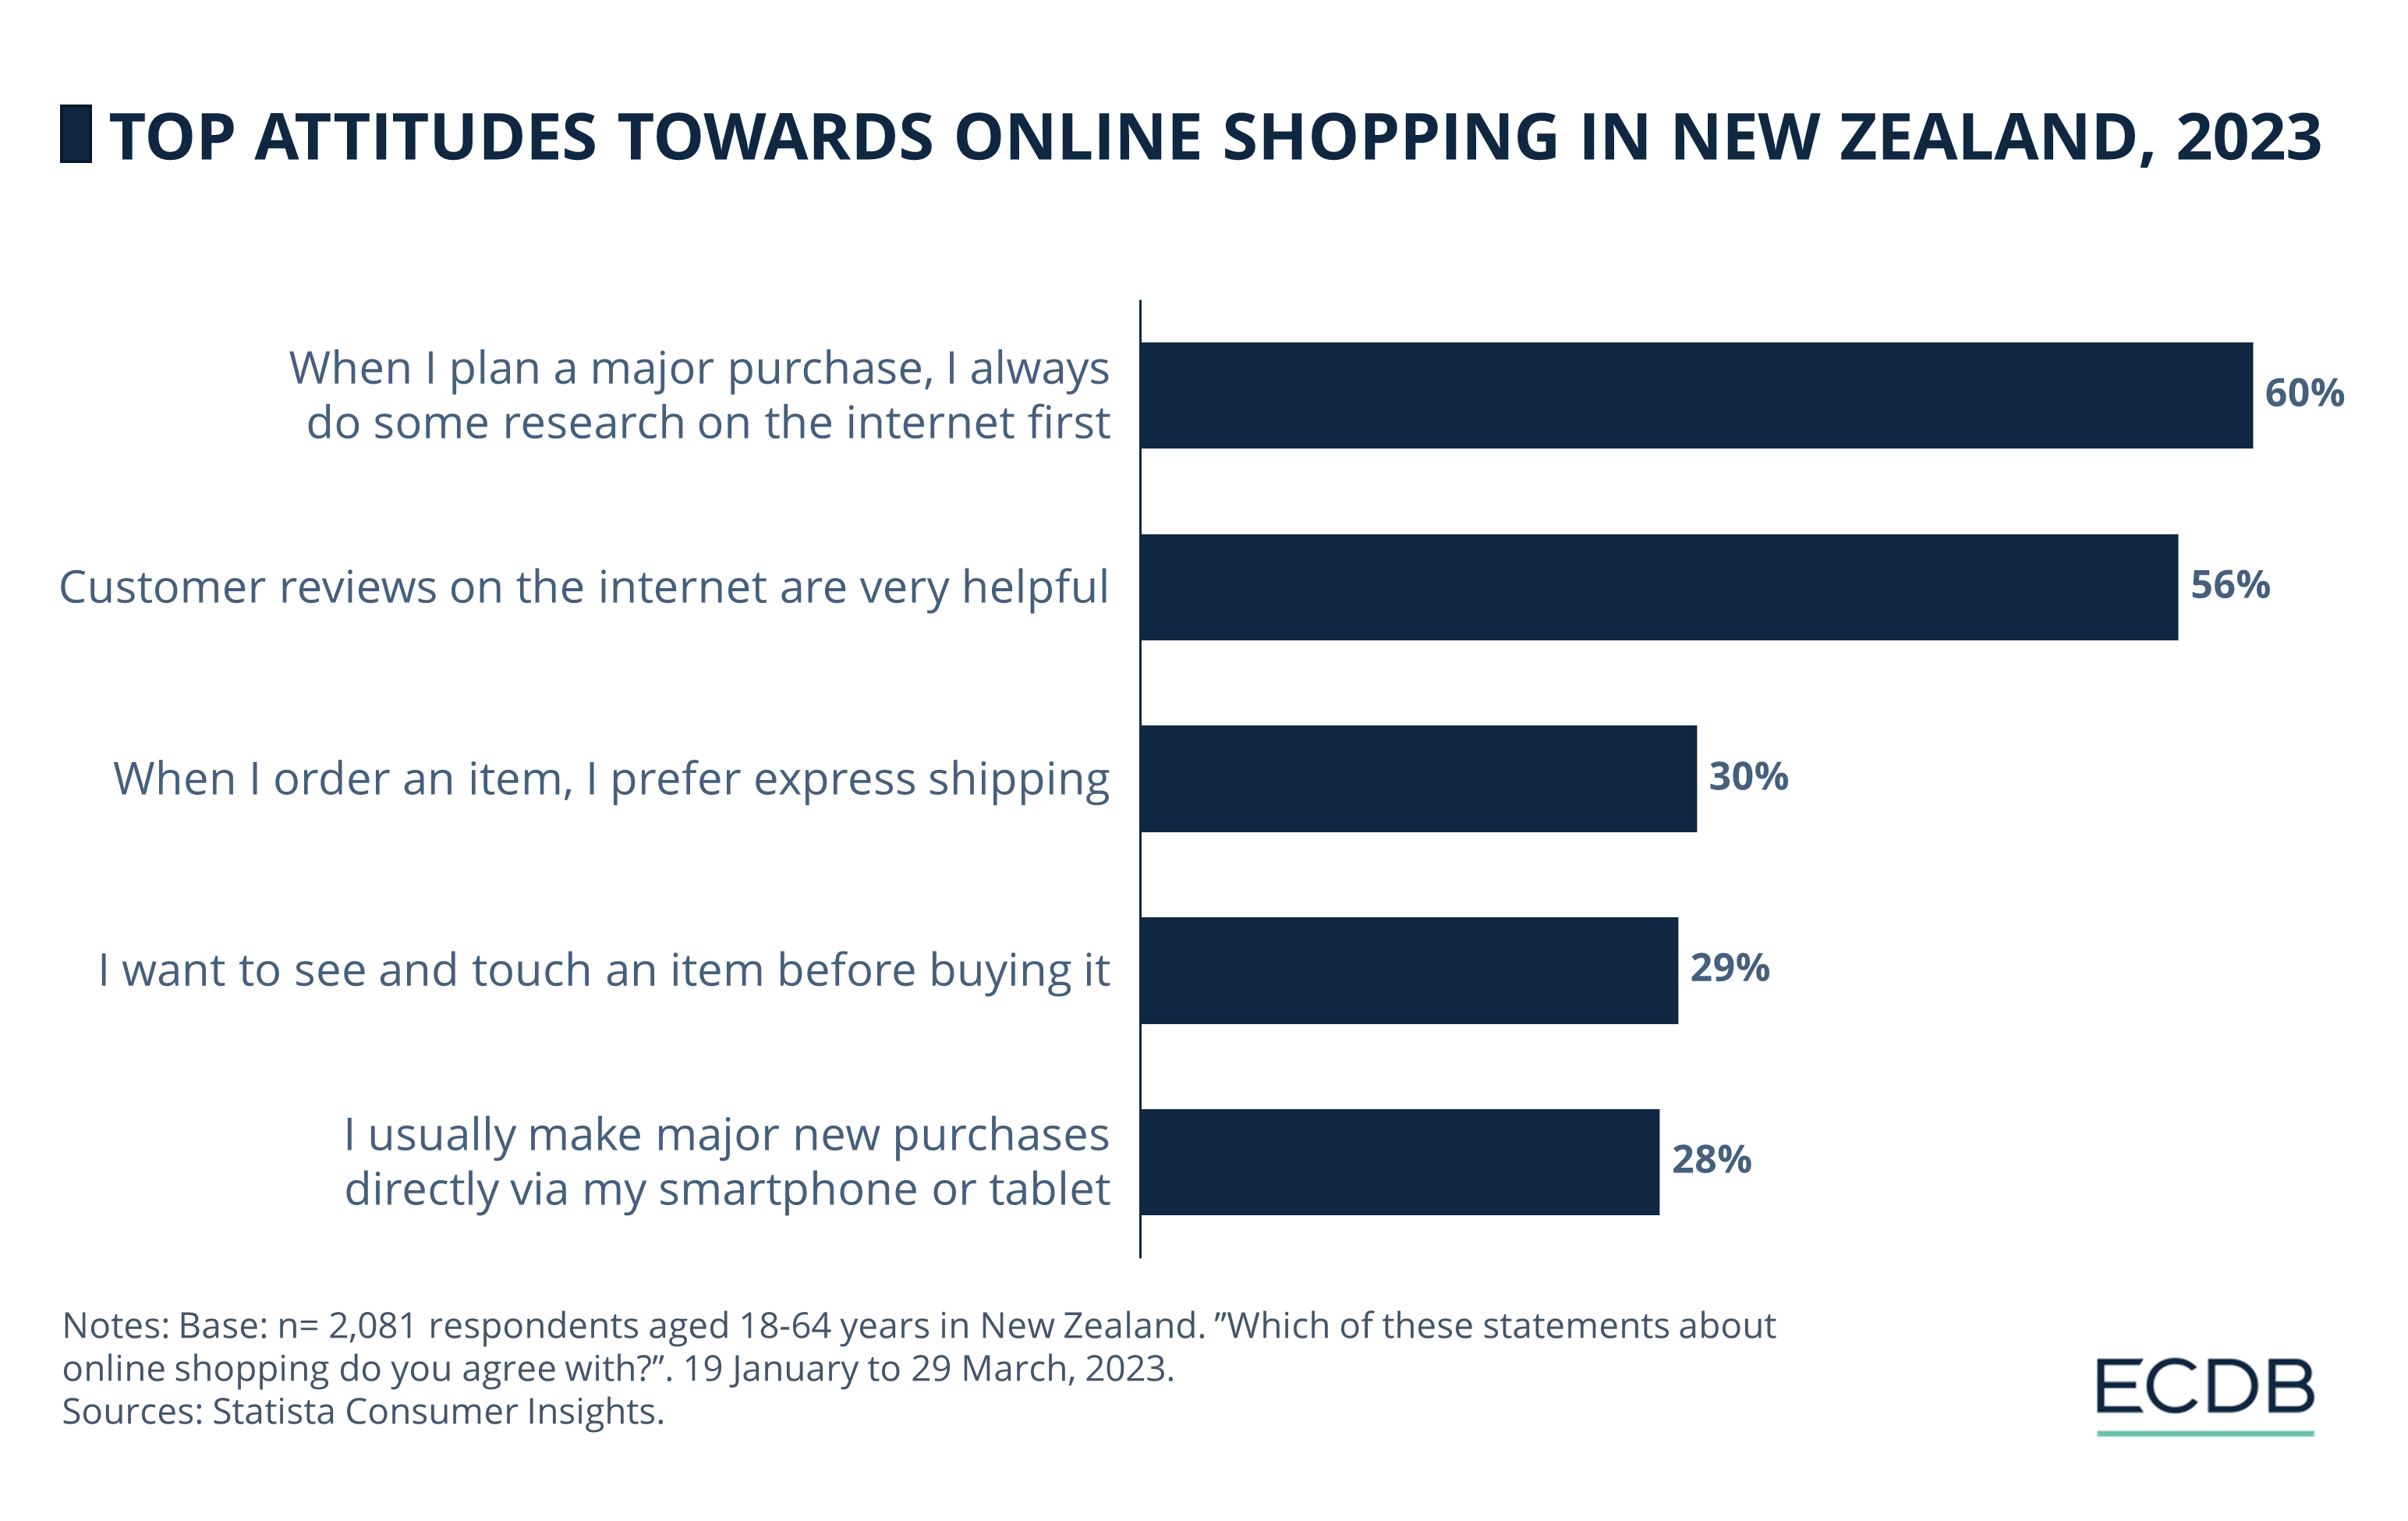 Top Attitudes Towards Online Shopping in New Zealand, 2023